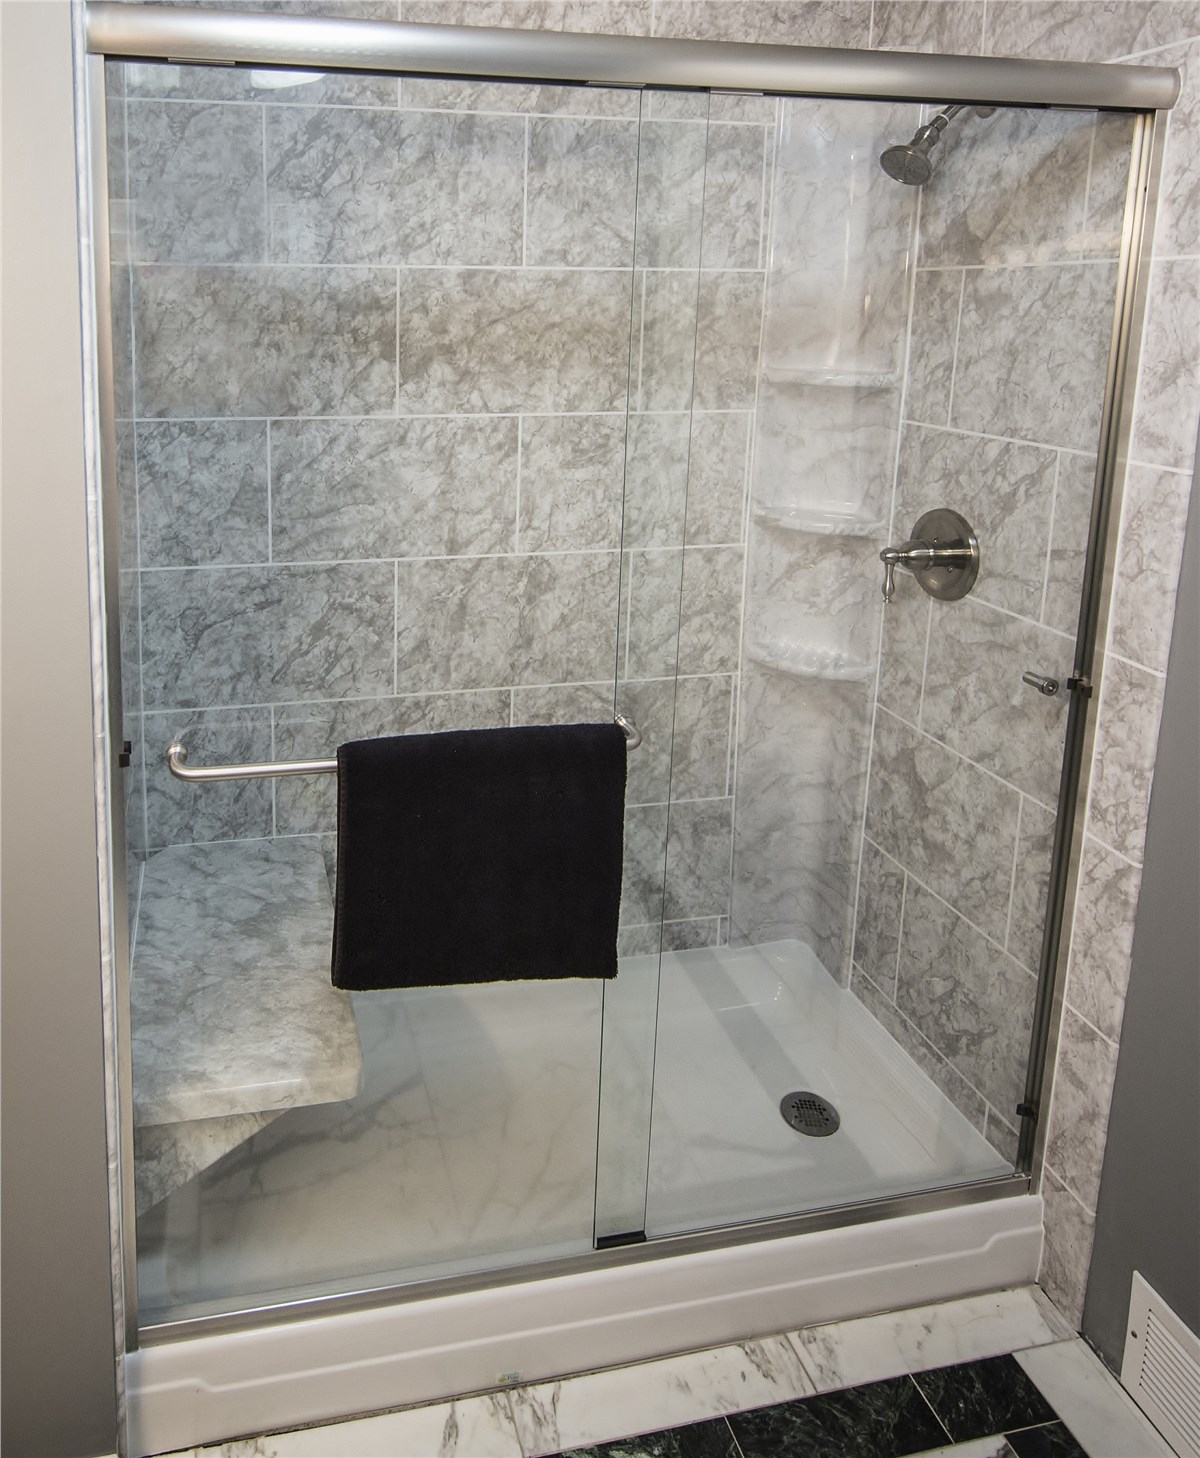 Shower Seats | Towel Bars | Bath and Shower Accessories ...